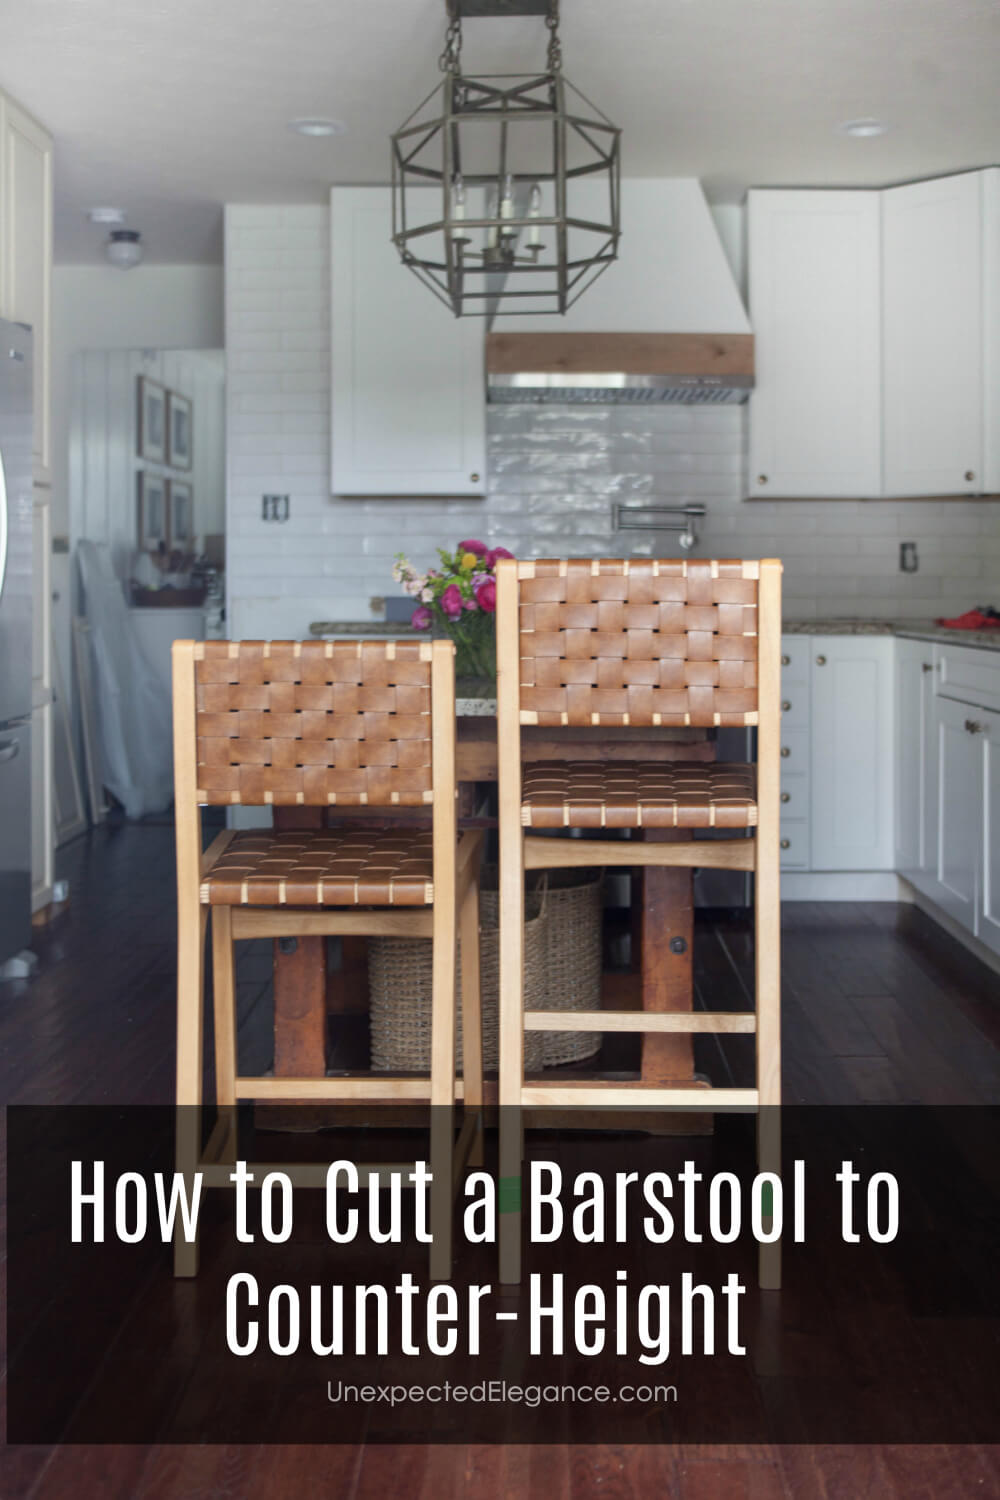 Find out how to cut a barstool to counter height easily!  If you need your barstool to be shorter, this might be a great solution!!